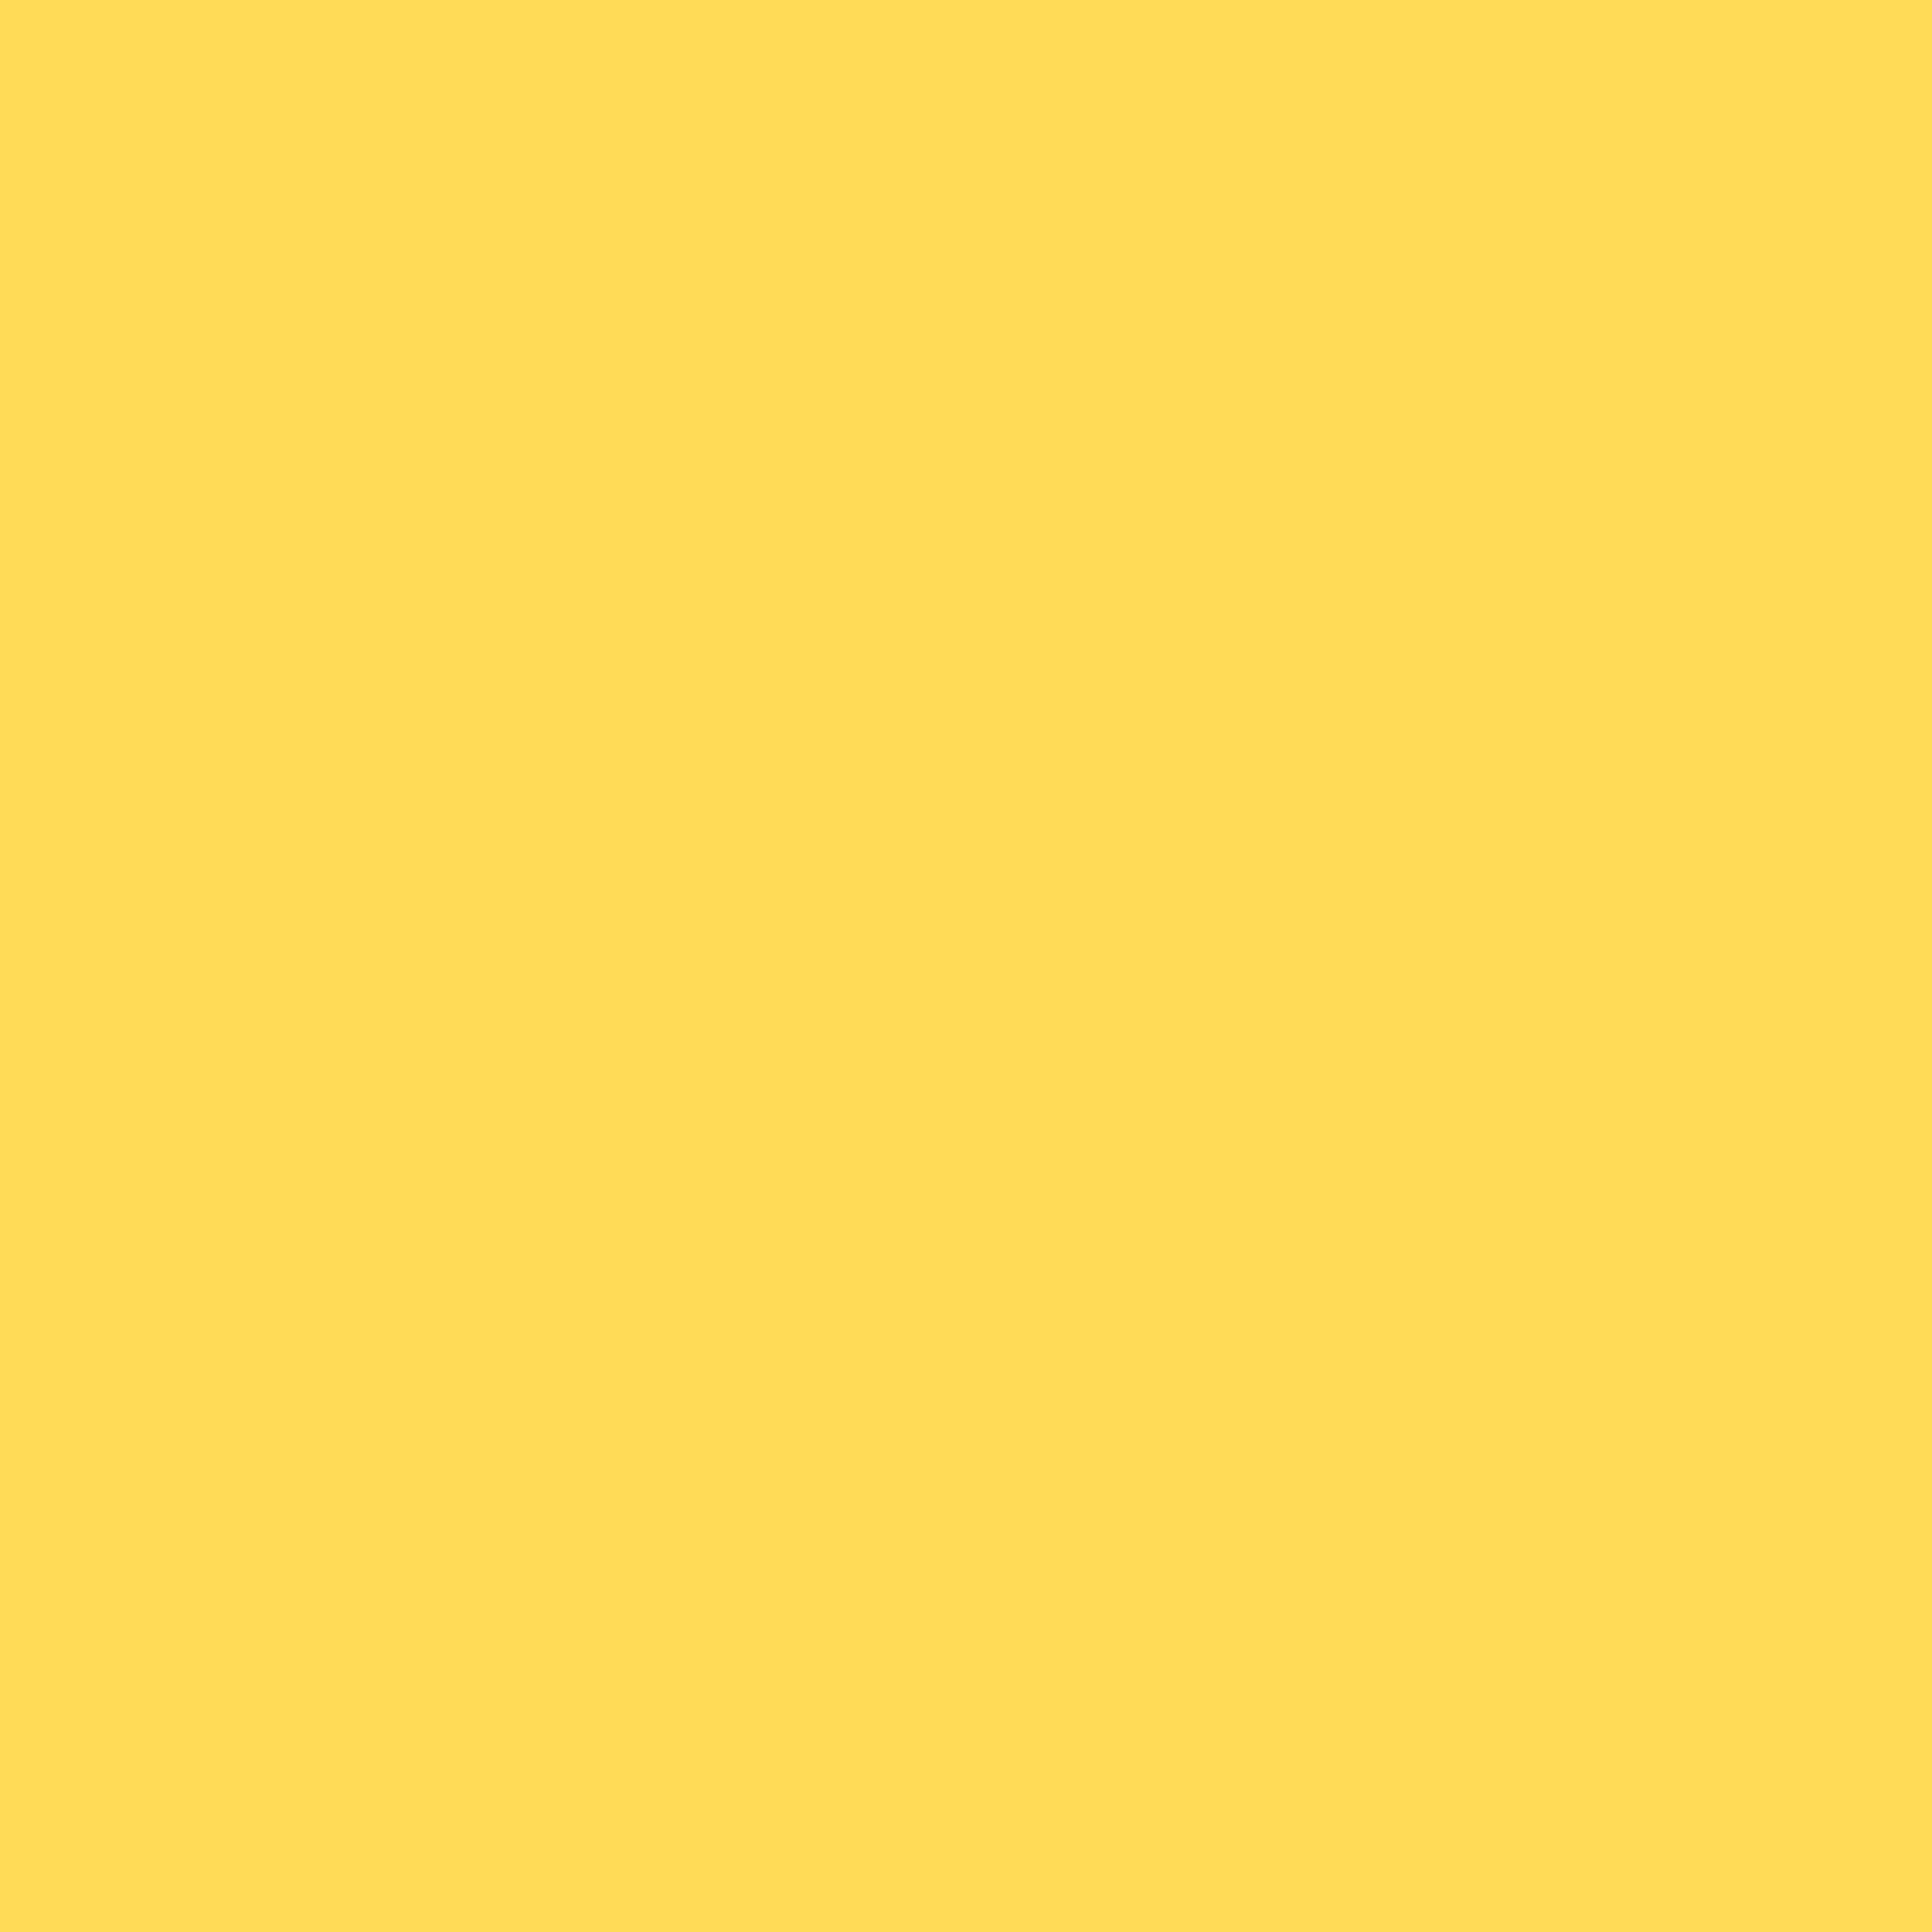 3600x3600 Mustard Solid Color Background